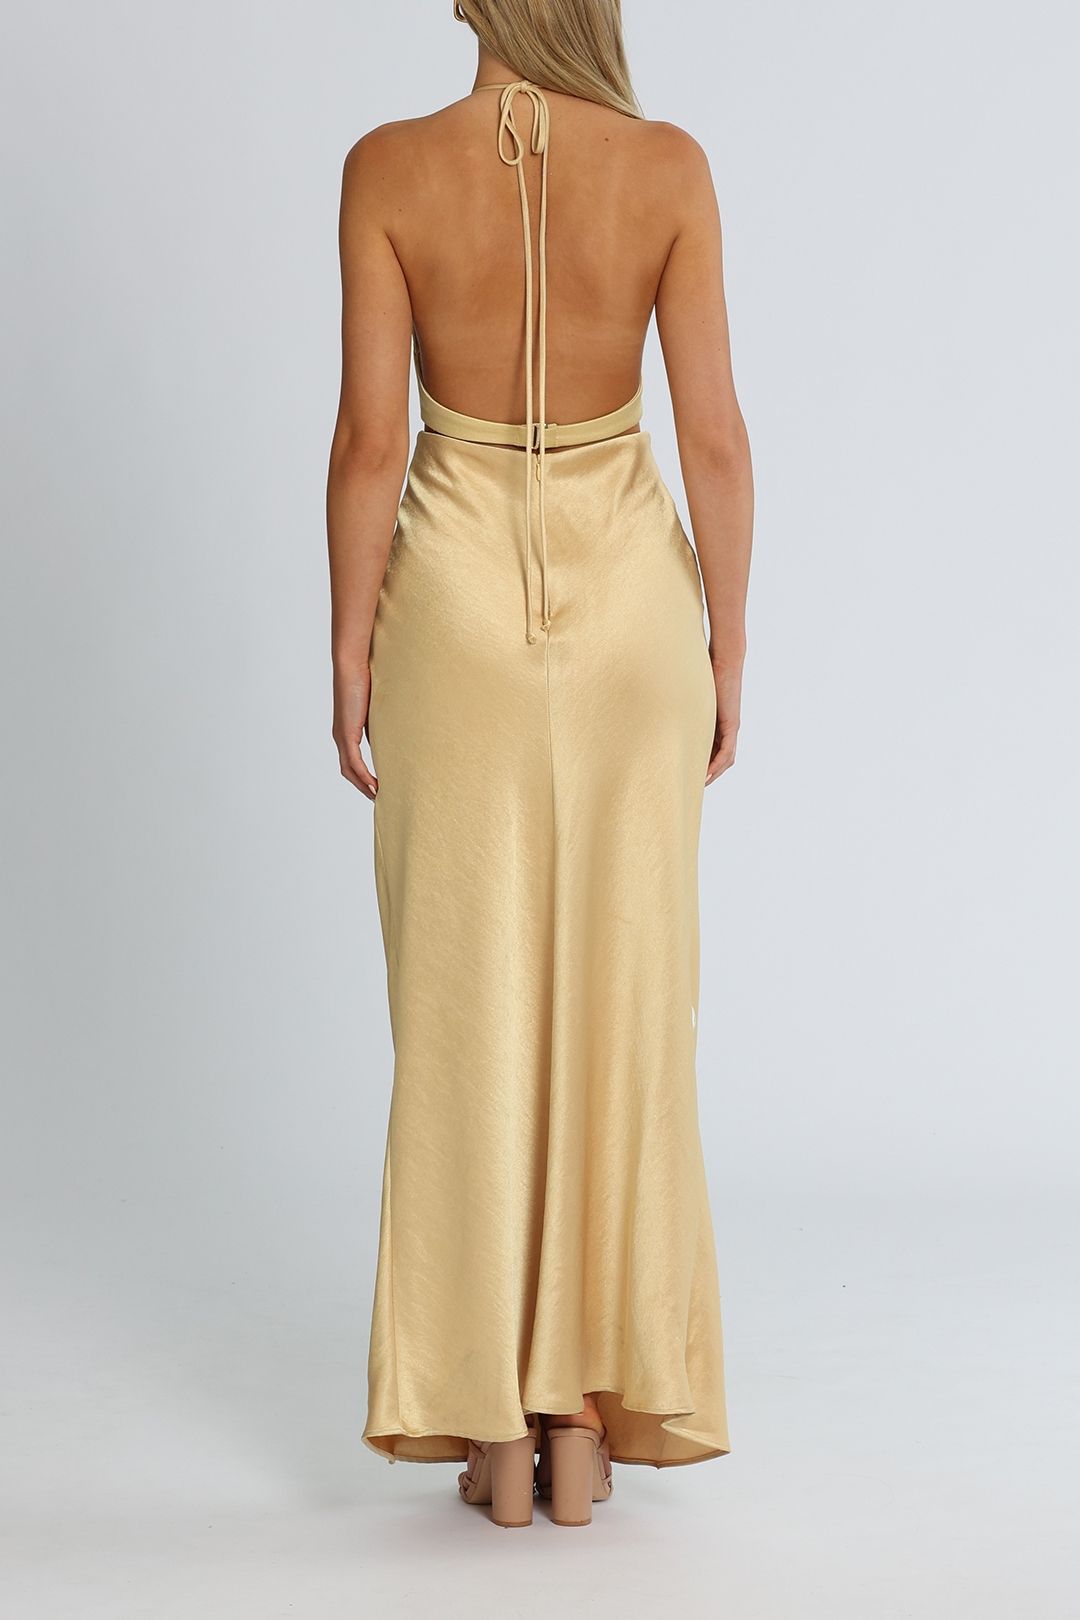 Bec and Bridge Carrie Halter Maxi Dress Yellow Backless